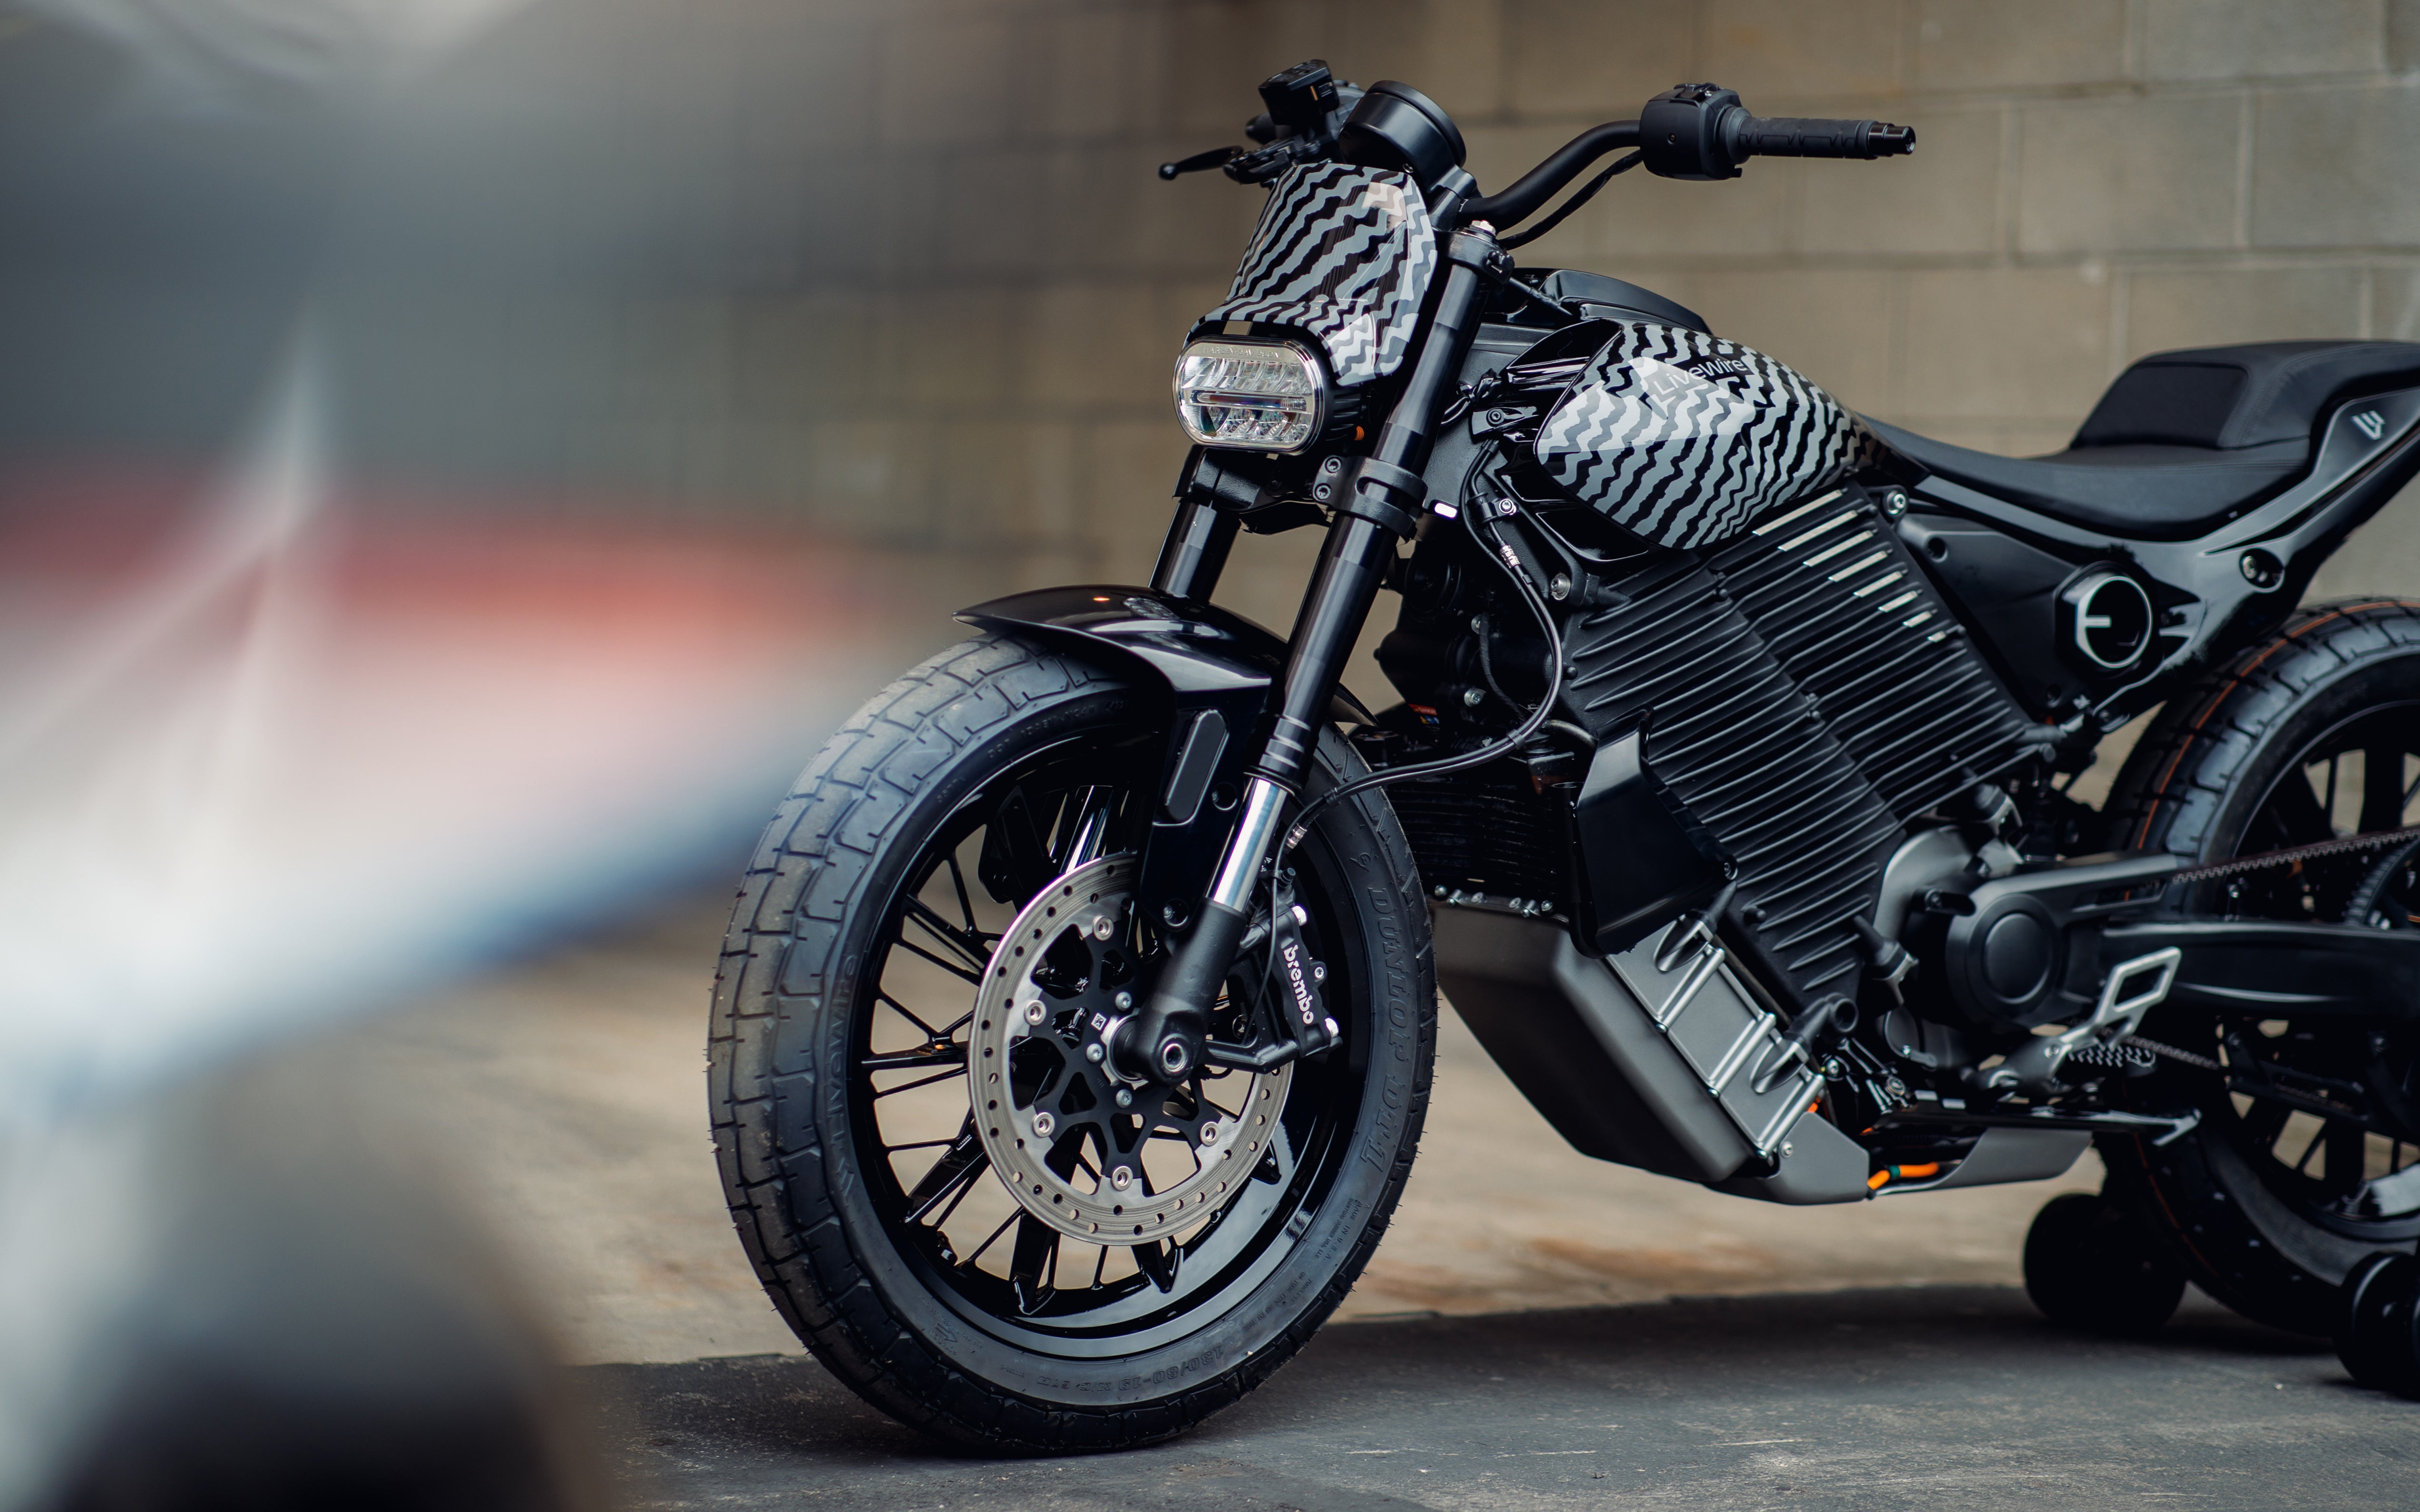 Harley-Davidson’s Best-Looking Electric Motorcycle Yet Is the Livewire S2 Del Mar